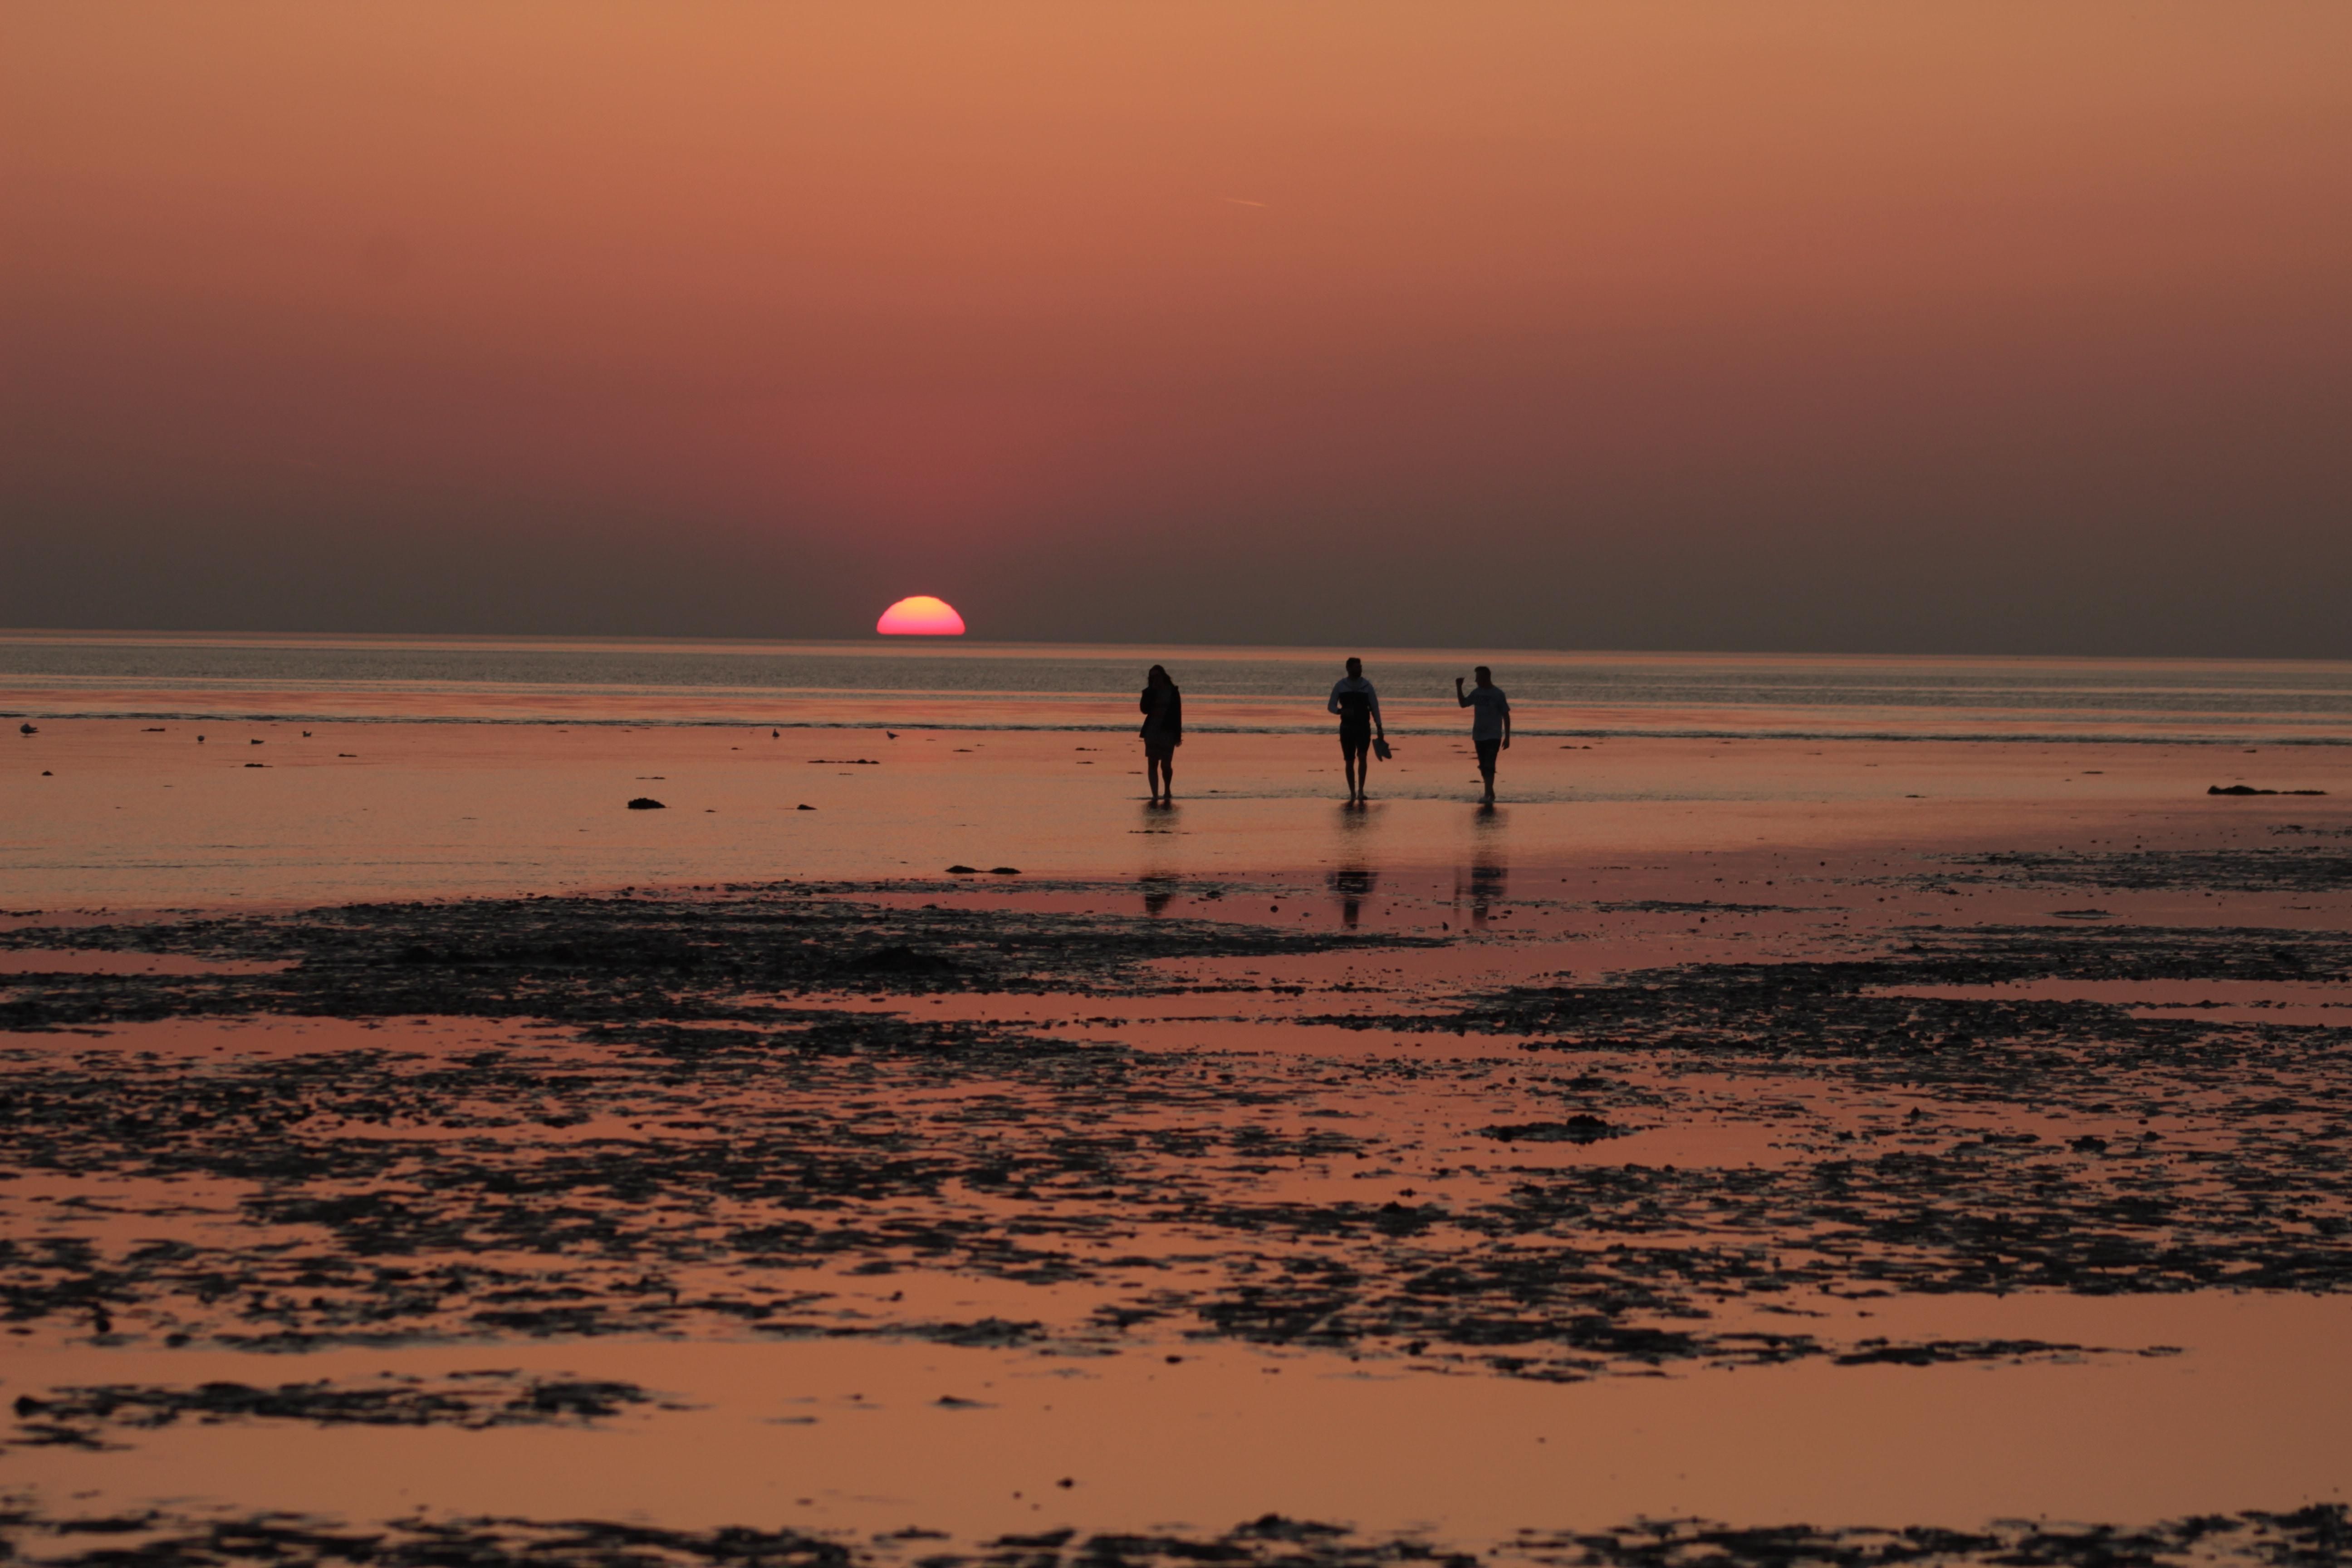 Sunsetting over the Norfolk Coast with friends walking along the sand in the red and orange glow